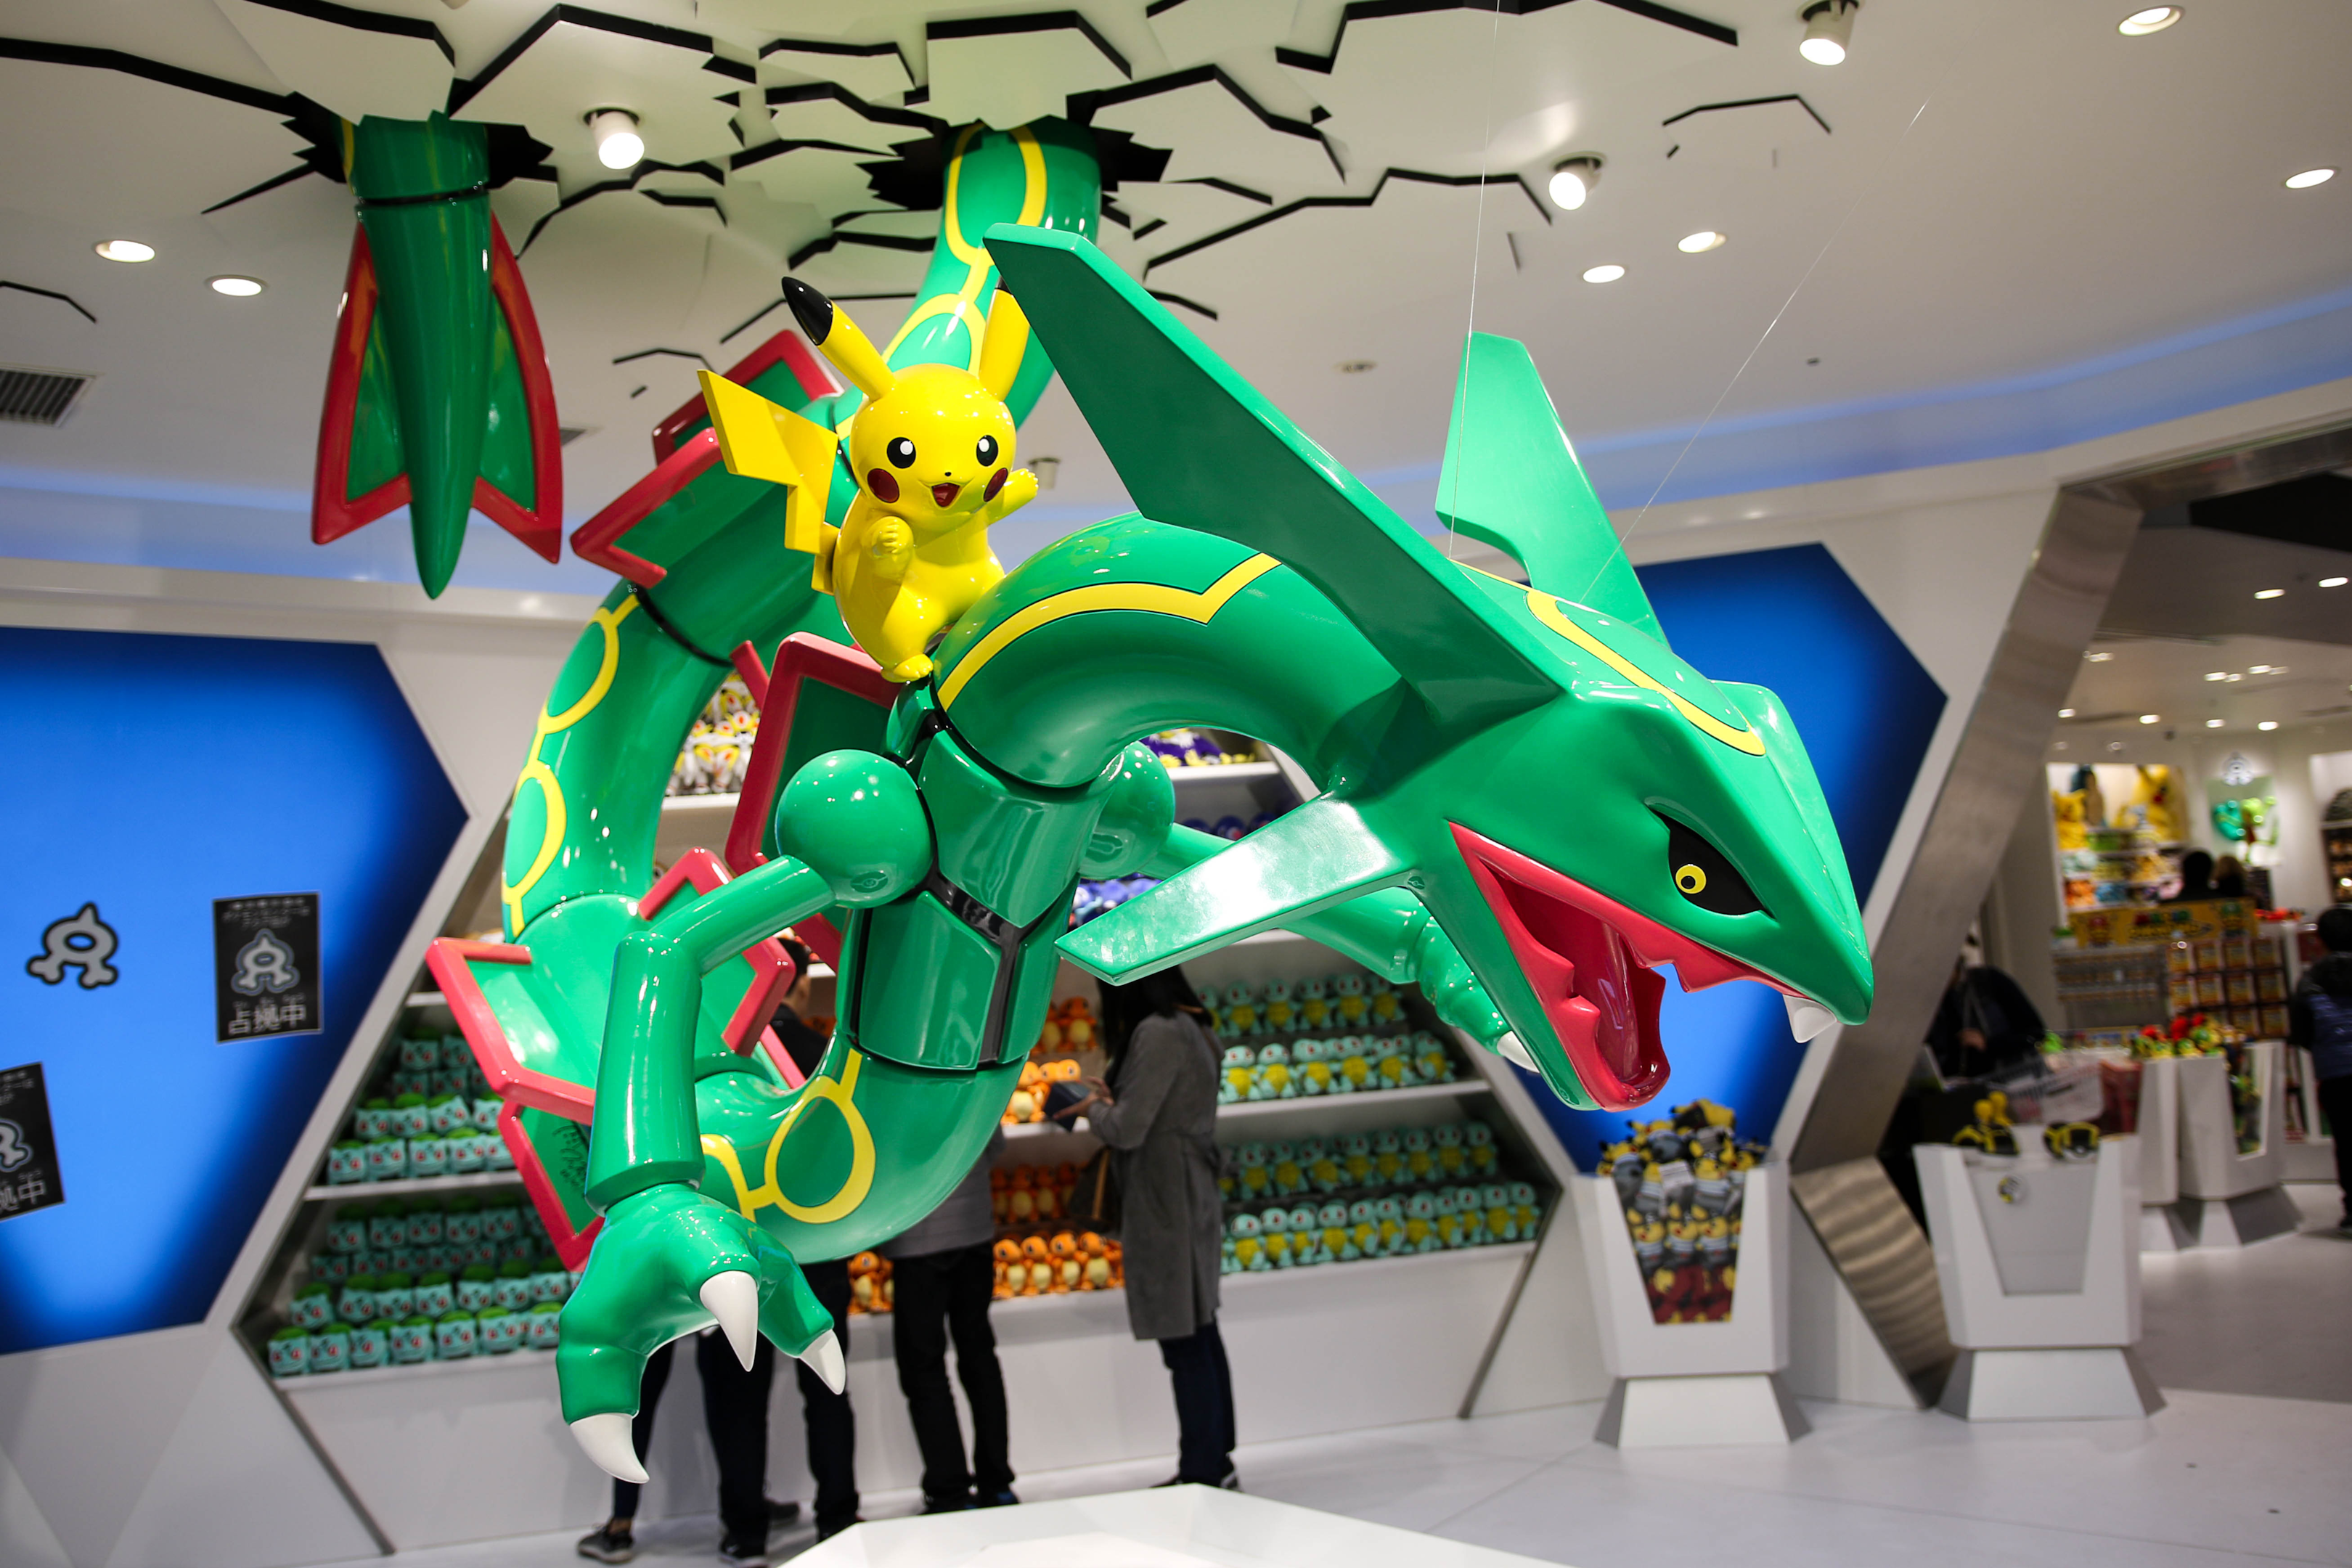 Pokémon Center featuring Pikachu and Rayquaza